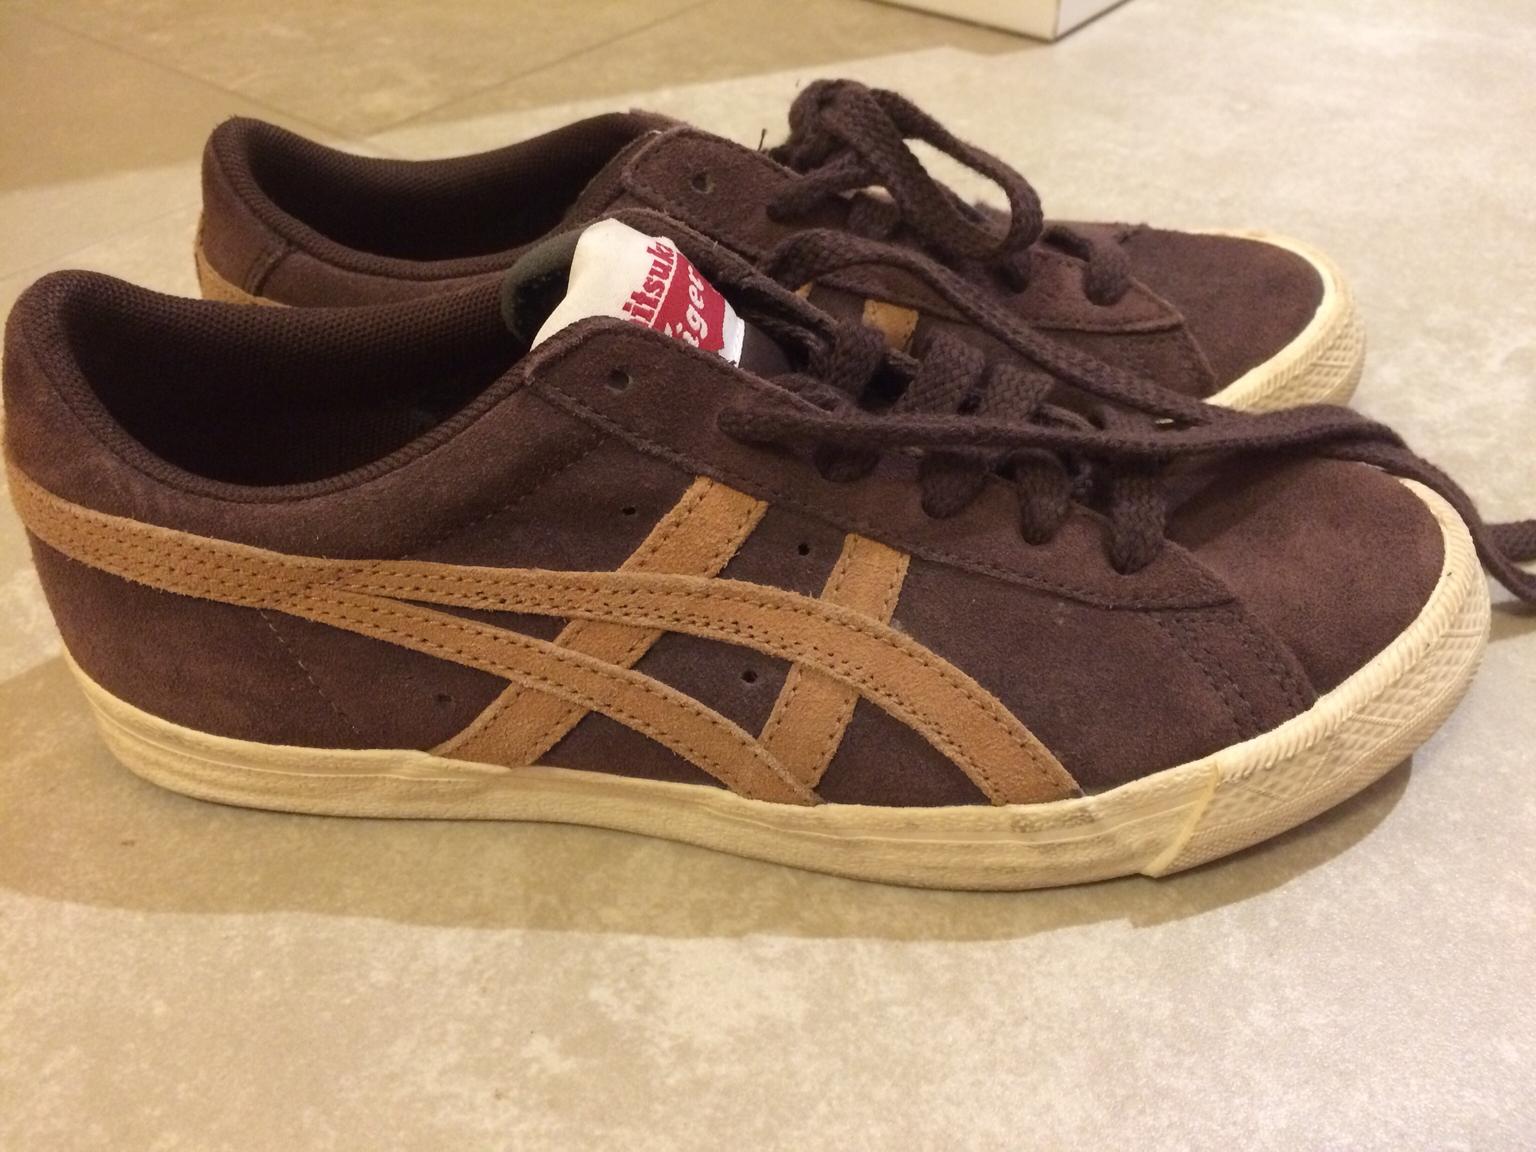 Onitsuka Tiger n.37 in 20129 Milano for €22.00 for sale | Shpock